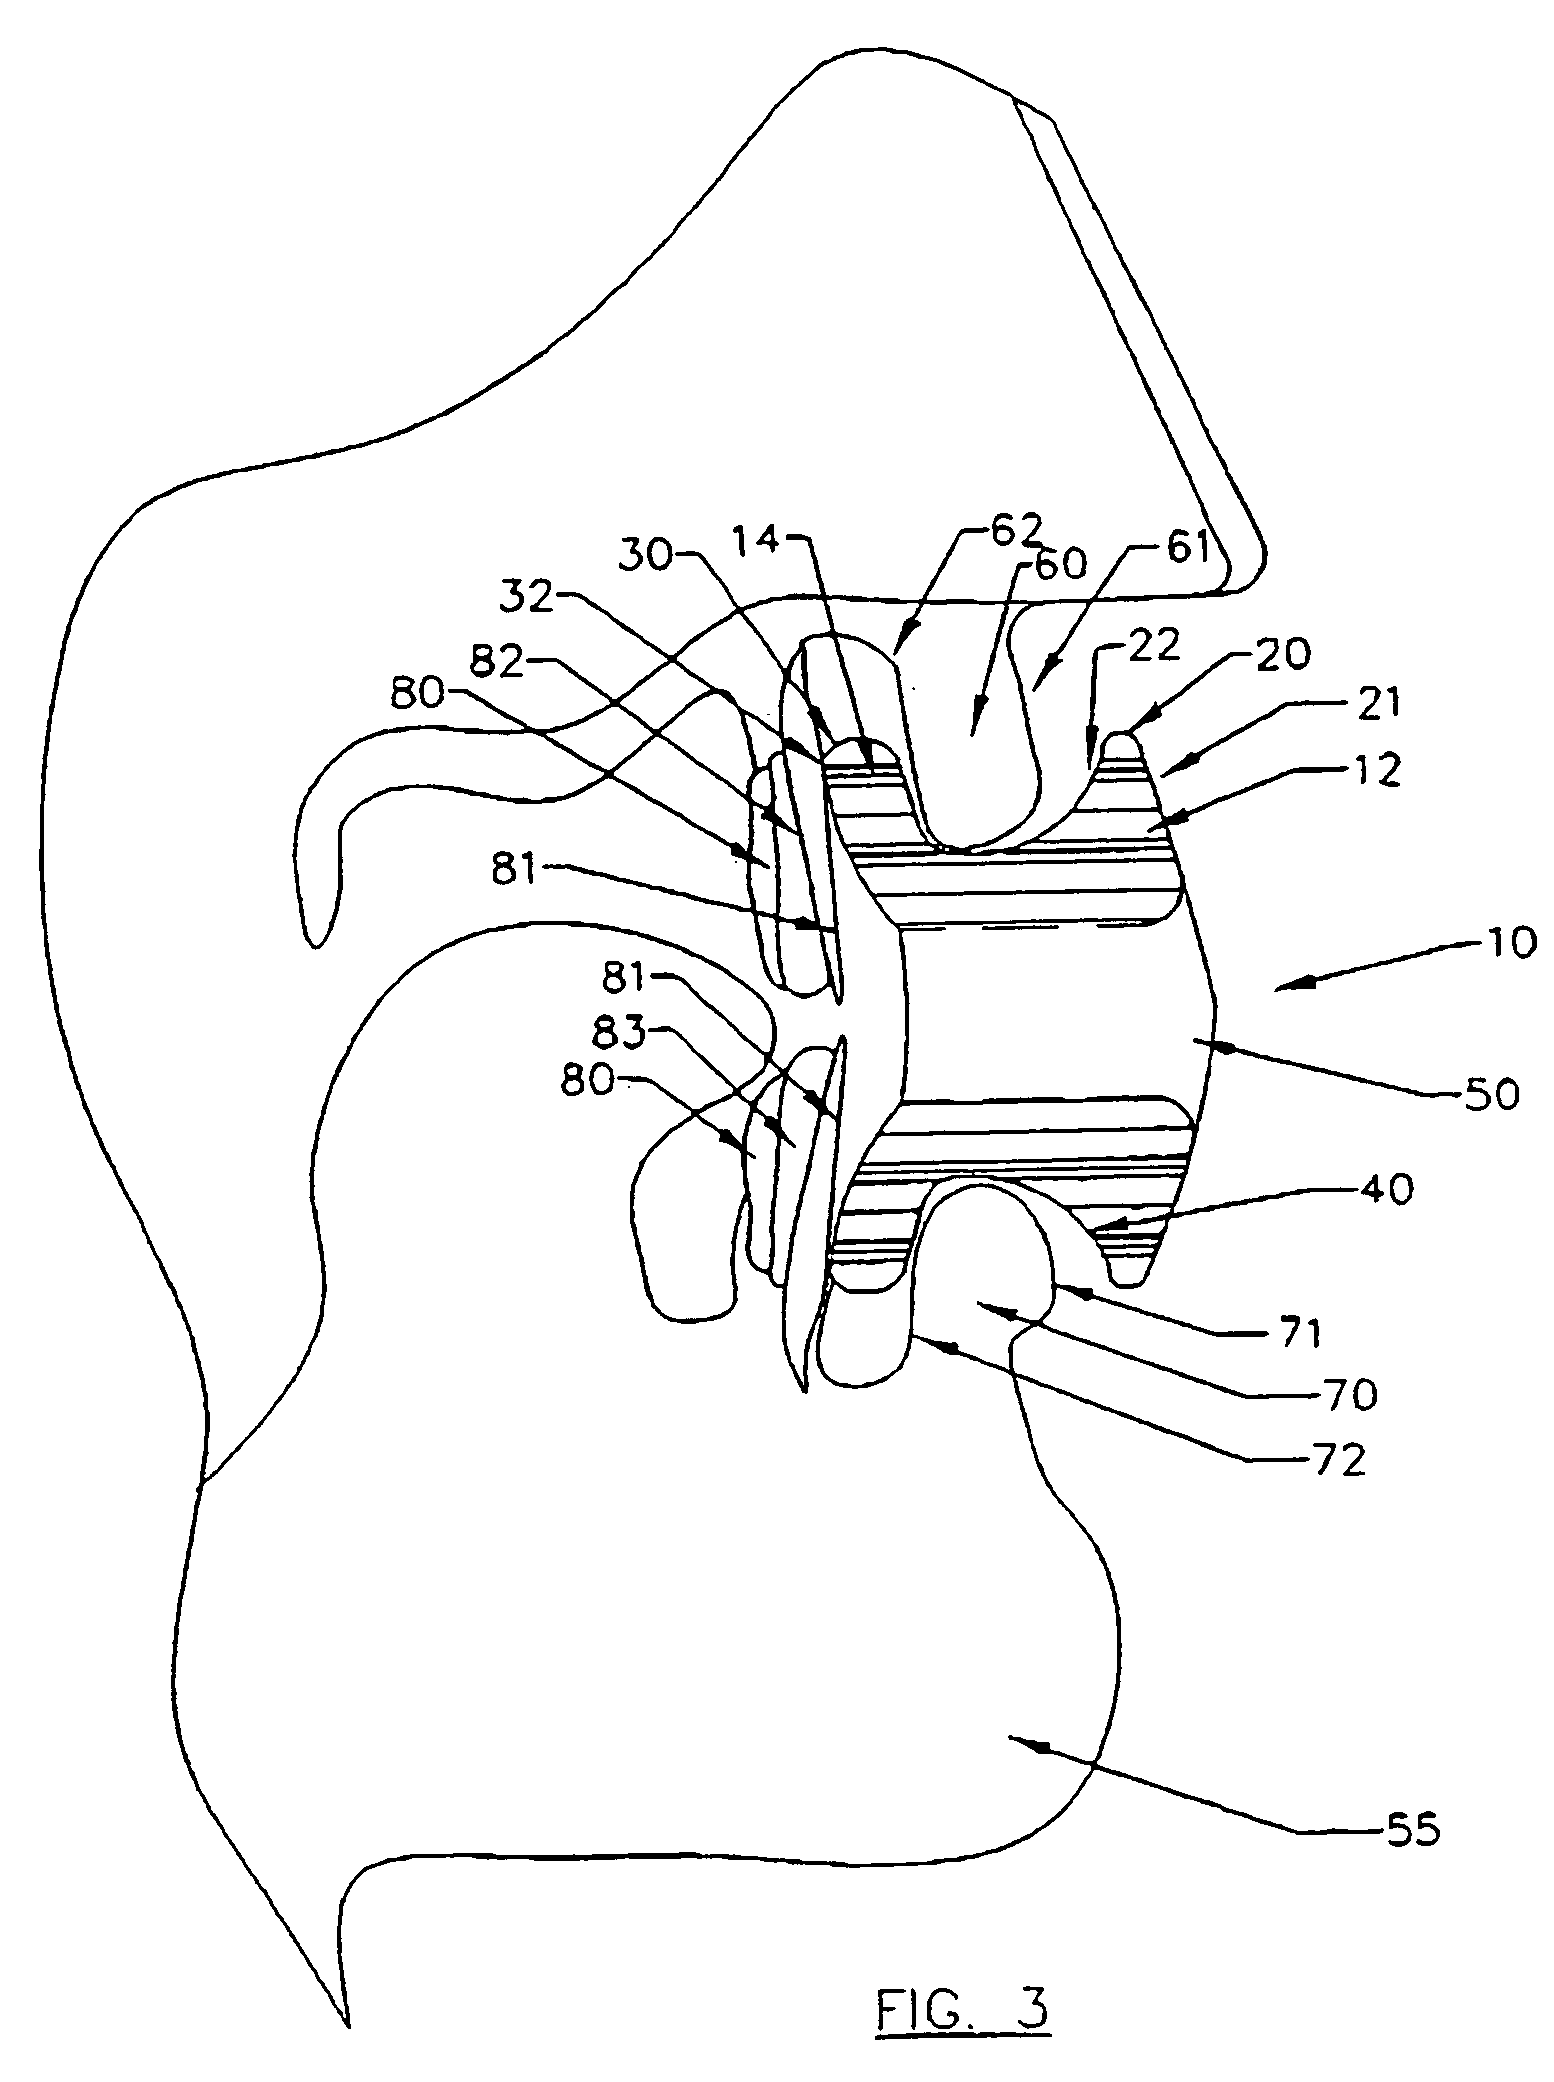 Apparatus for enhancing exercises and methods of using same